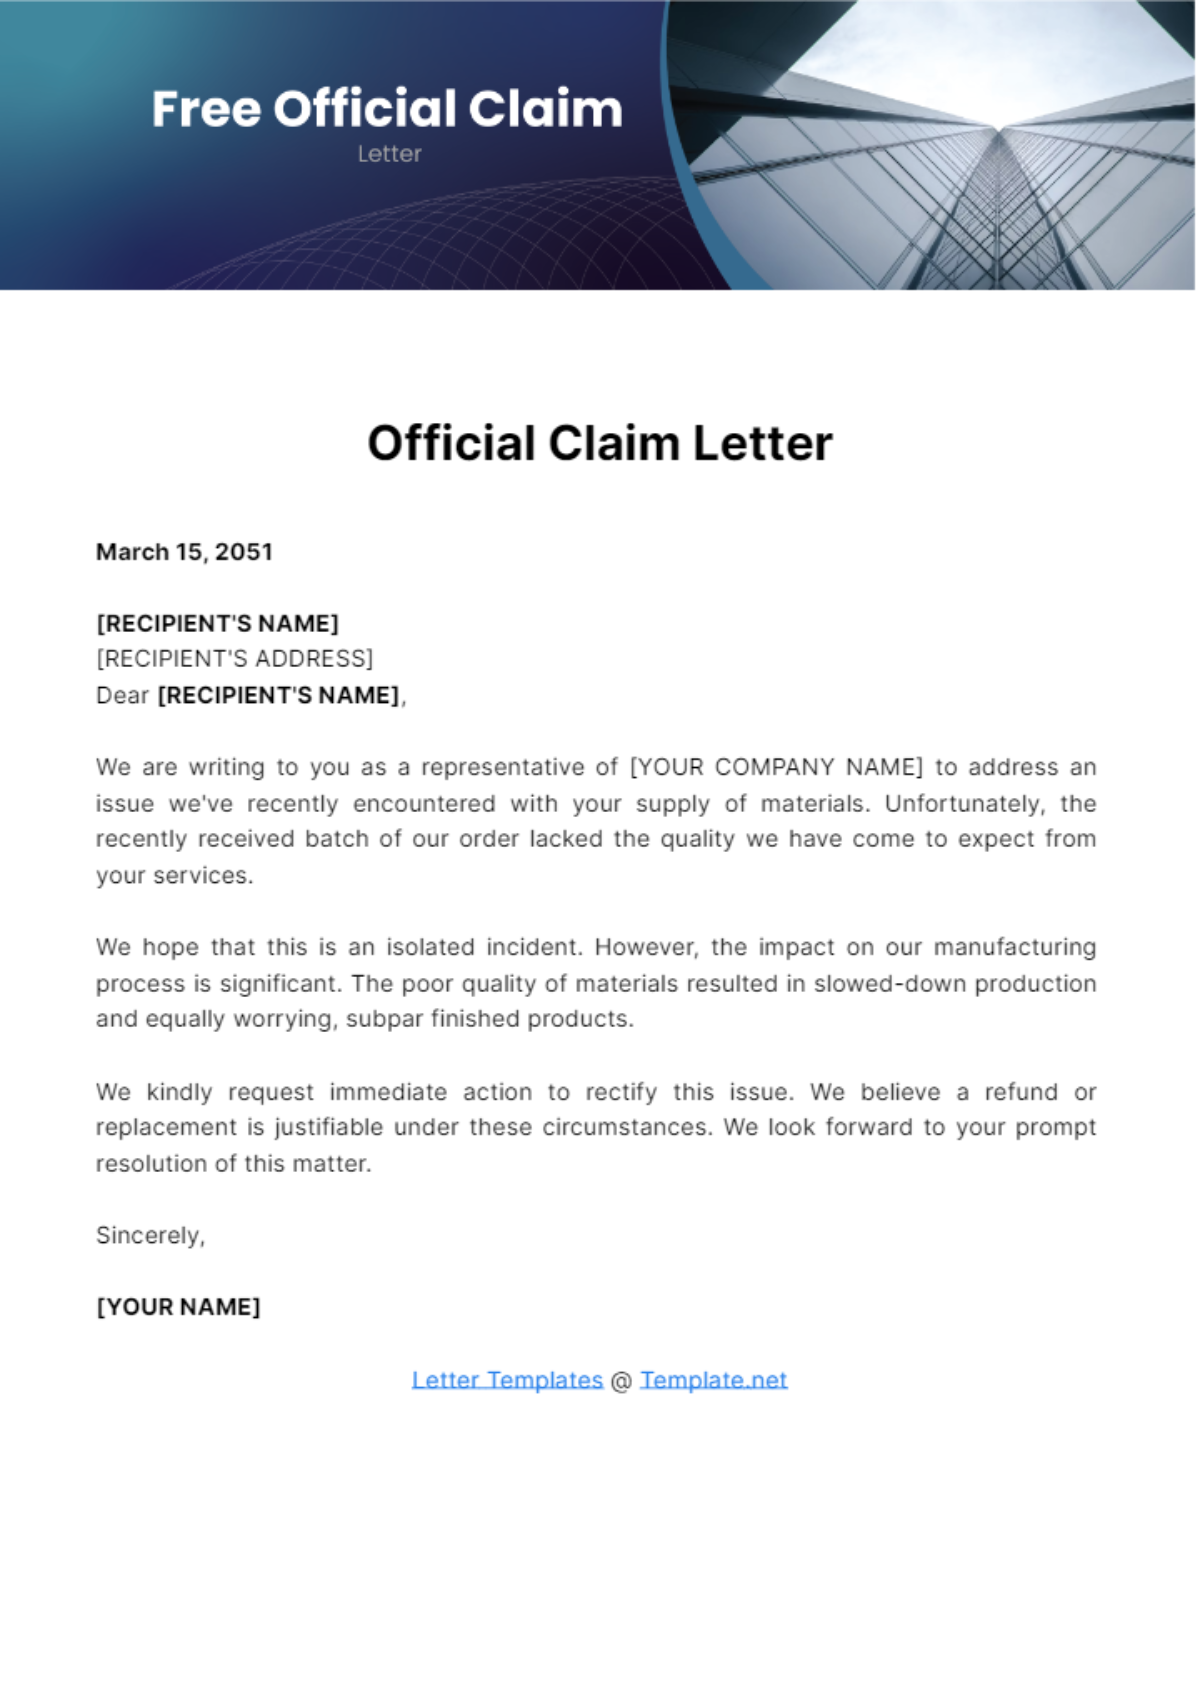 Official Claim Letter Template